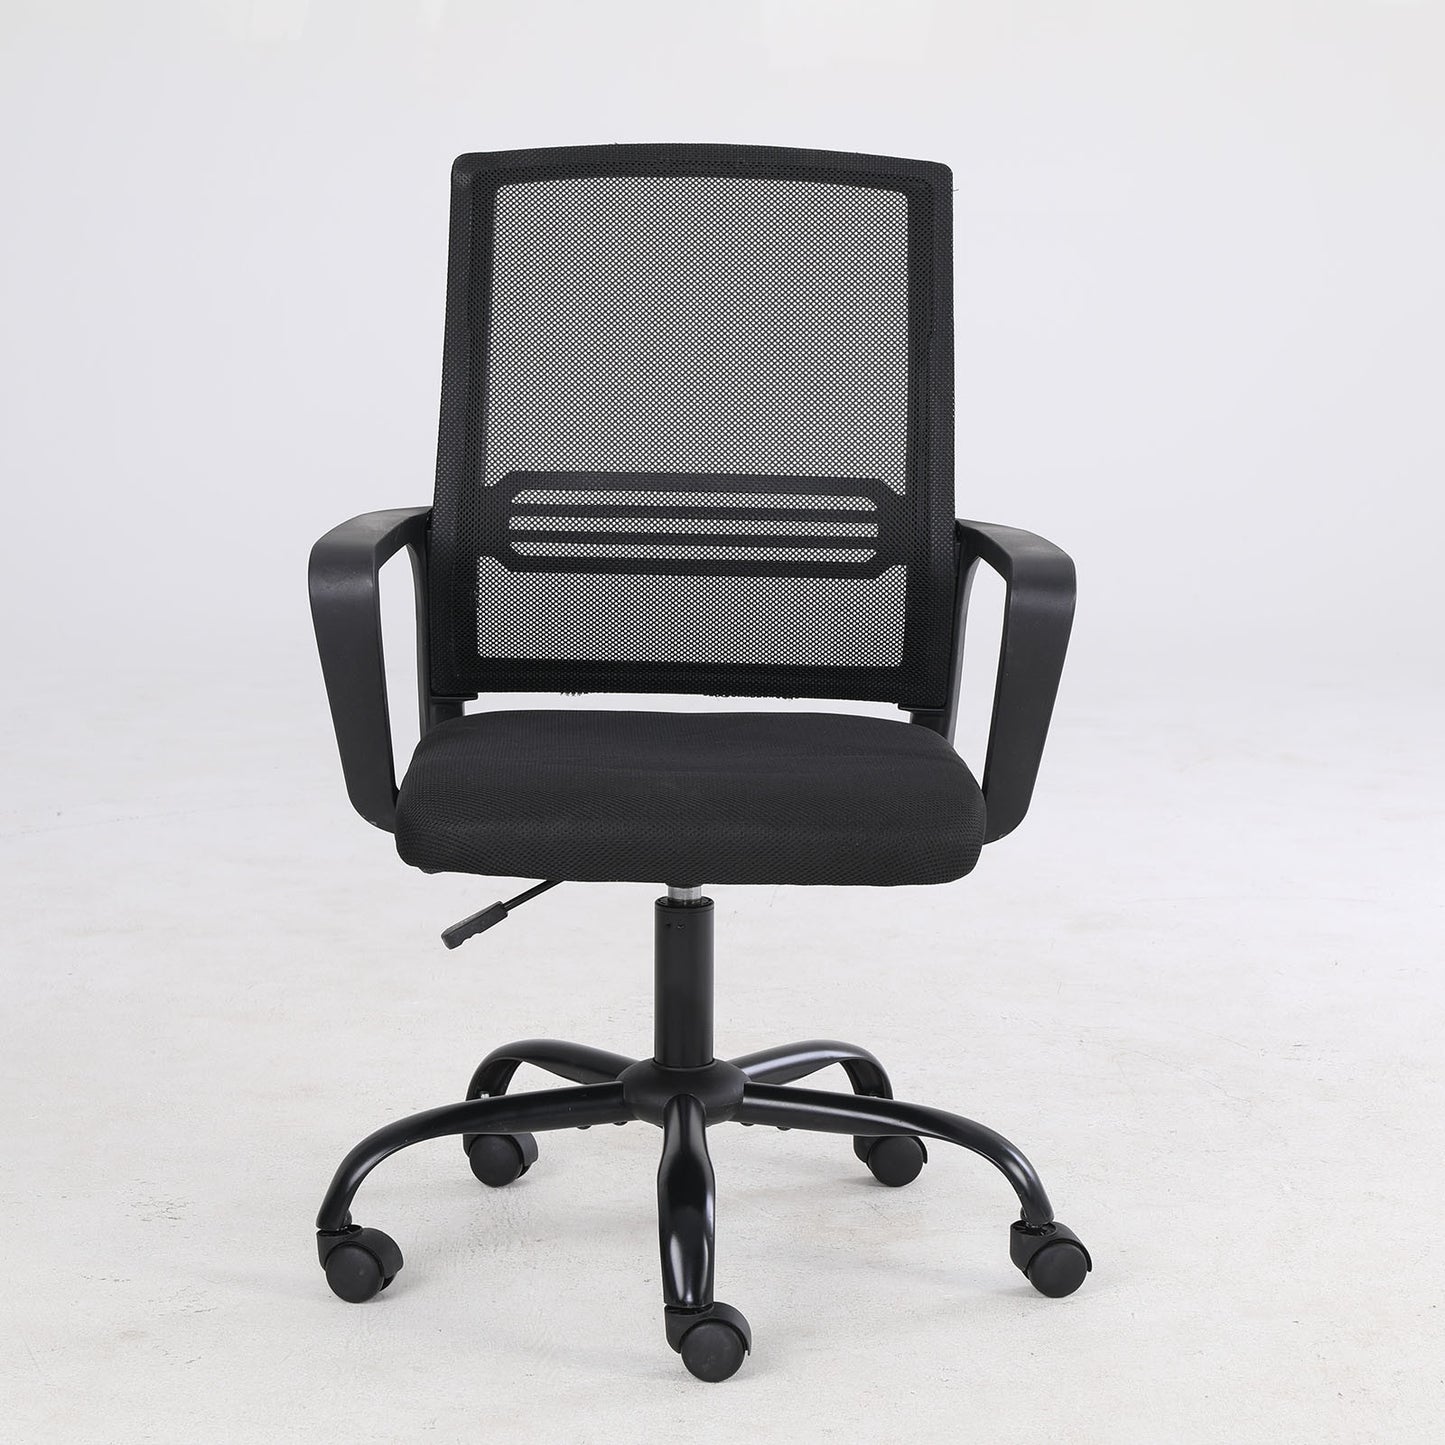 Office Chair Breathable Mesh, Computer Chair Lumbar Support, Modern Simple Adjustable Chair Height With Fixed Armrests, Suitable For Home Or Office (Black)